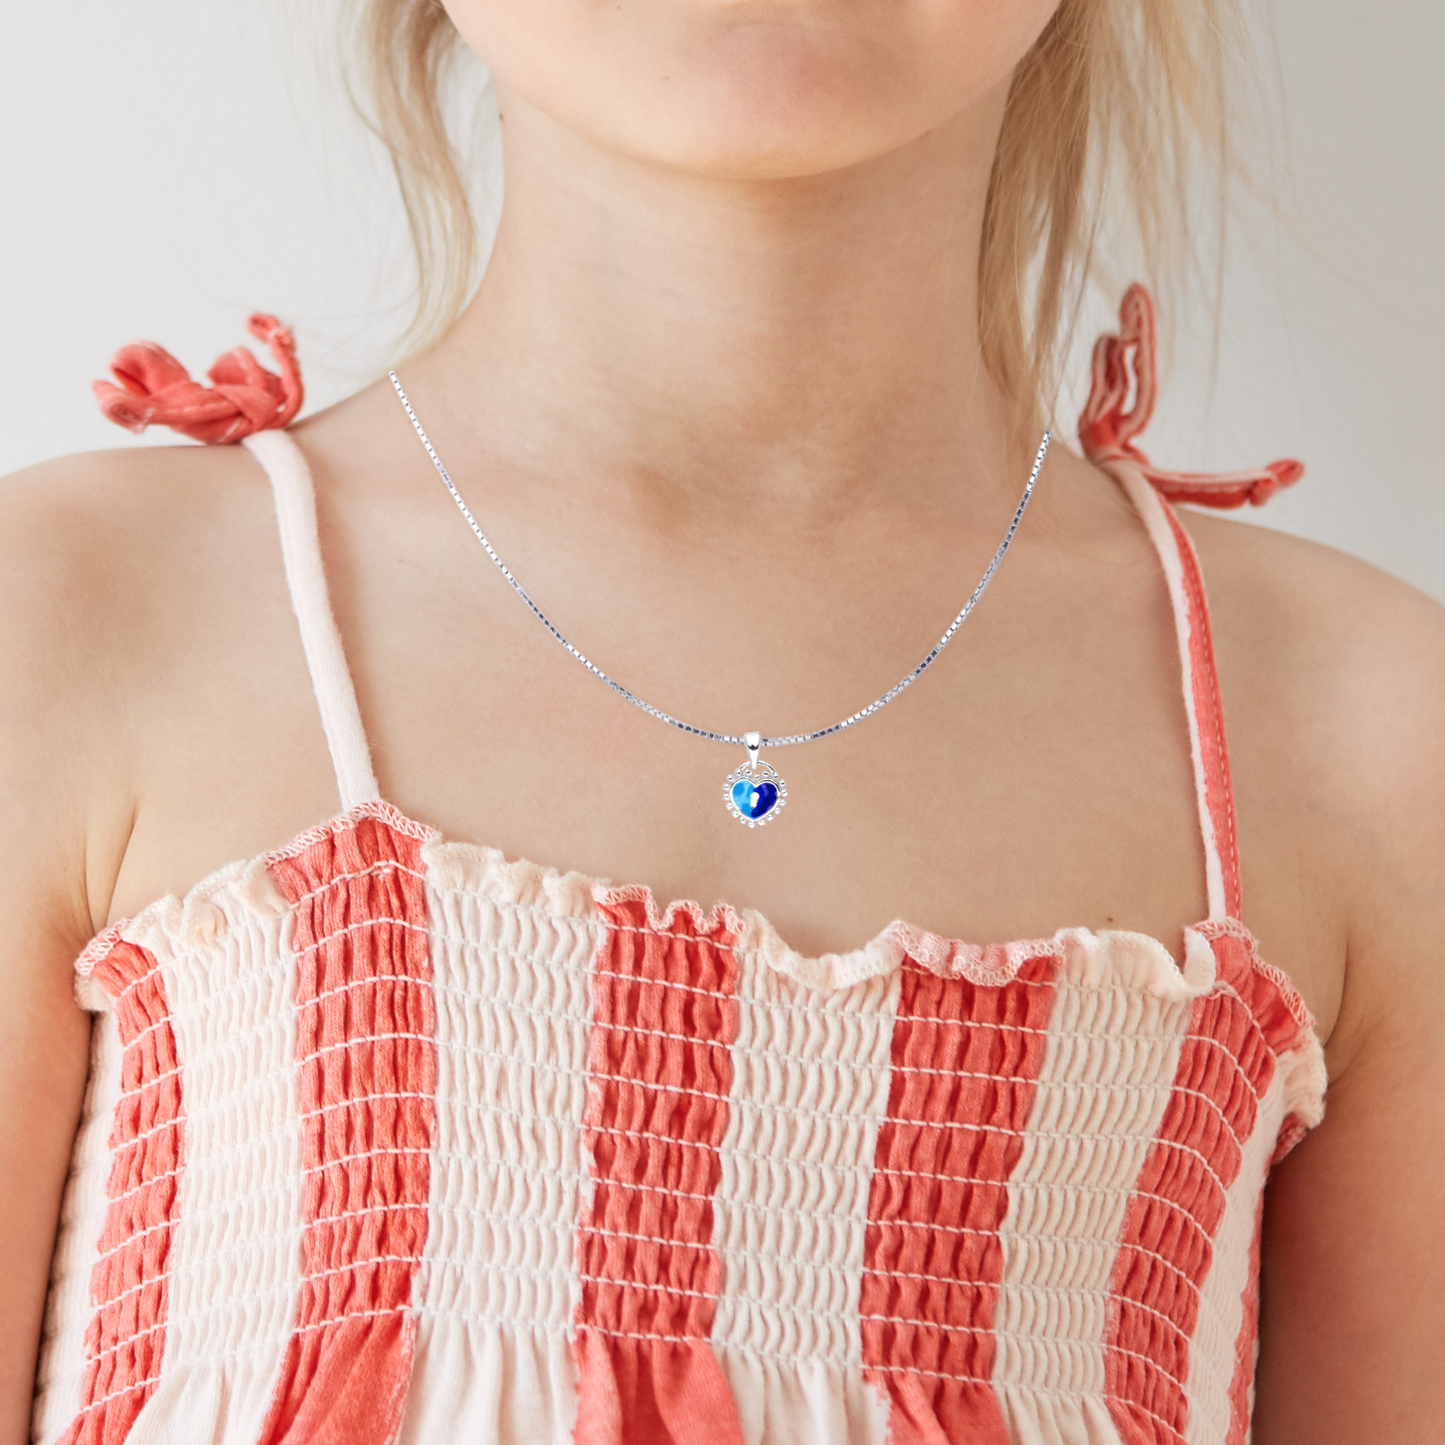 Ontique 925 Silver Blue heart Shaped Pendant For Kids